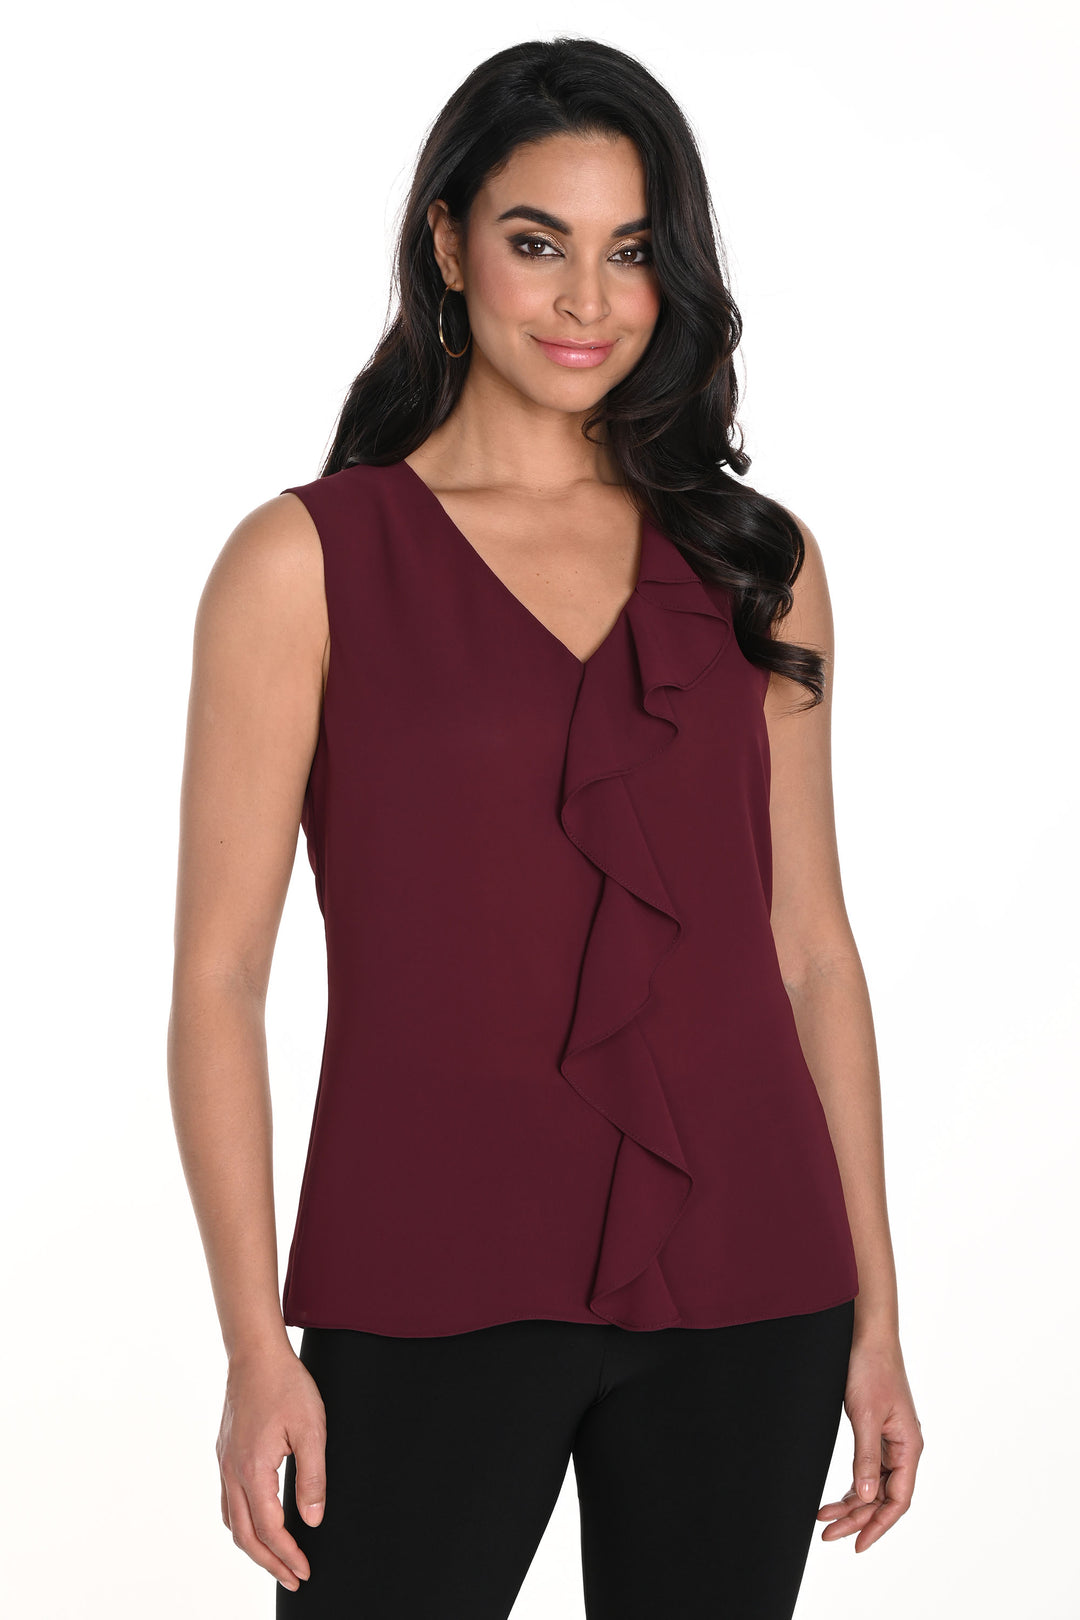 Frank Lyman Fall 2024 The standout ruffle front design and sharp v-neck add a touch of style to any outfit. Made for versatility, wear it casually or dress it up for a polished look.